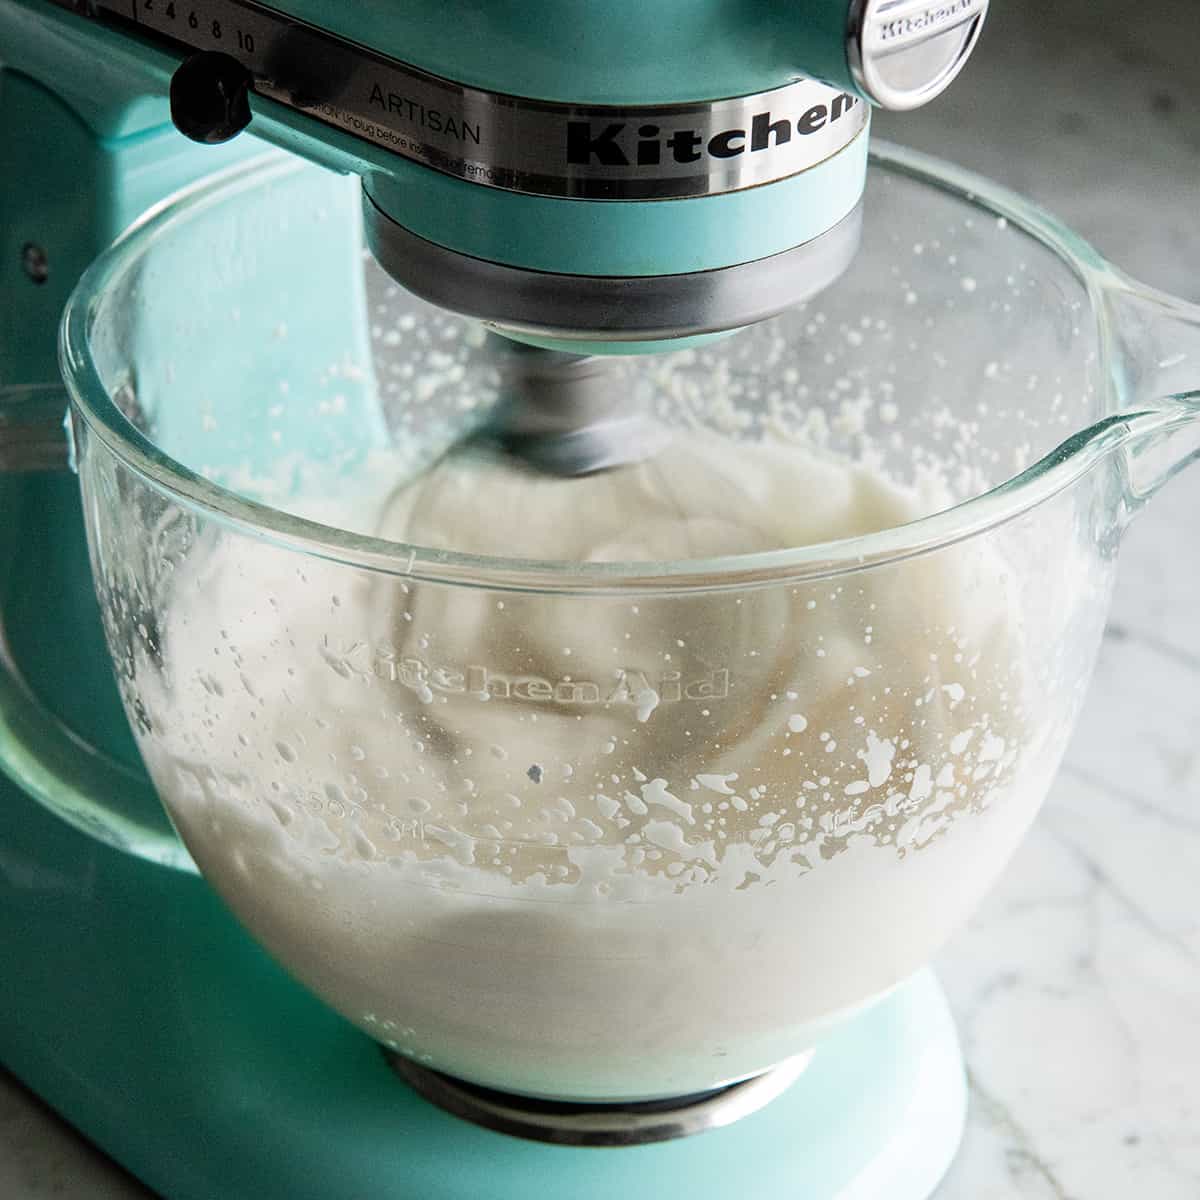 How to Make Whipped Cream - a standing mixer beating heavy cream